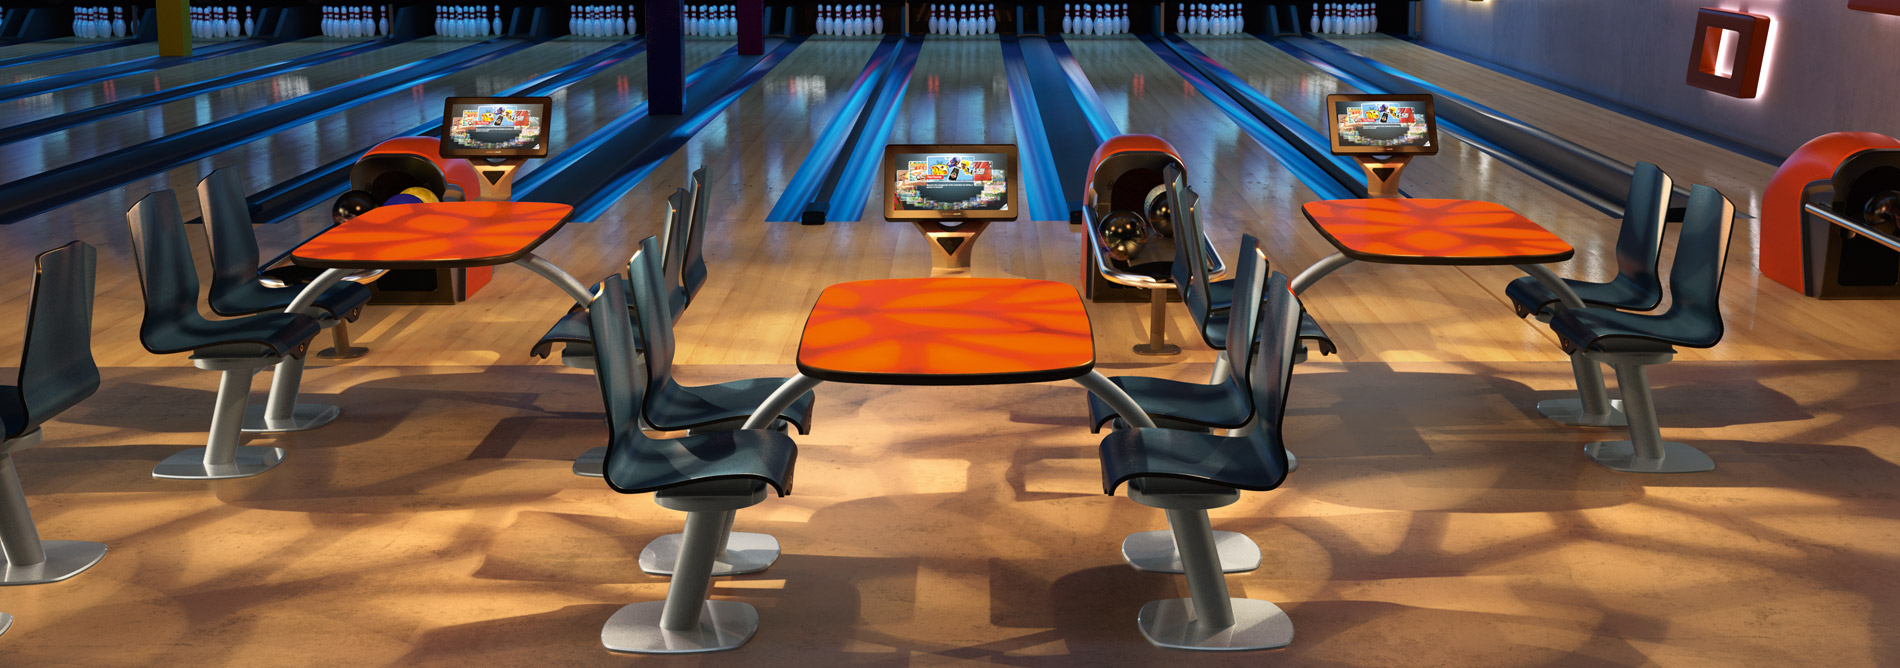 Bowling-QubicaAMF-furniture-Harmony-Table-collection-banner2.jpg